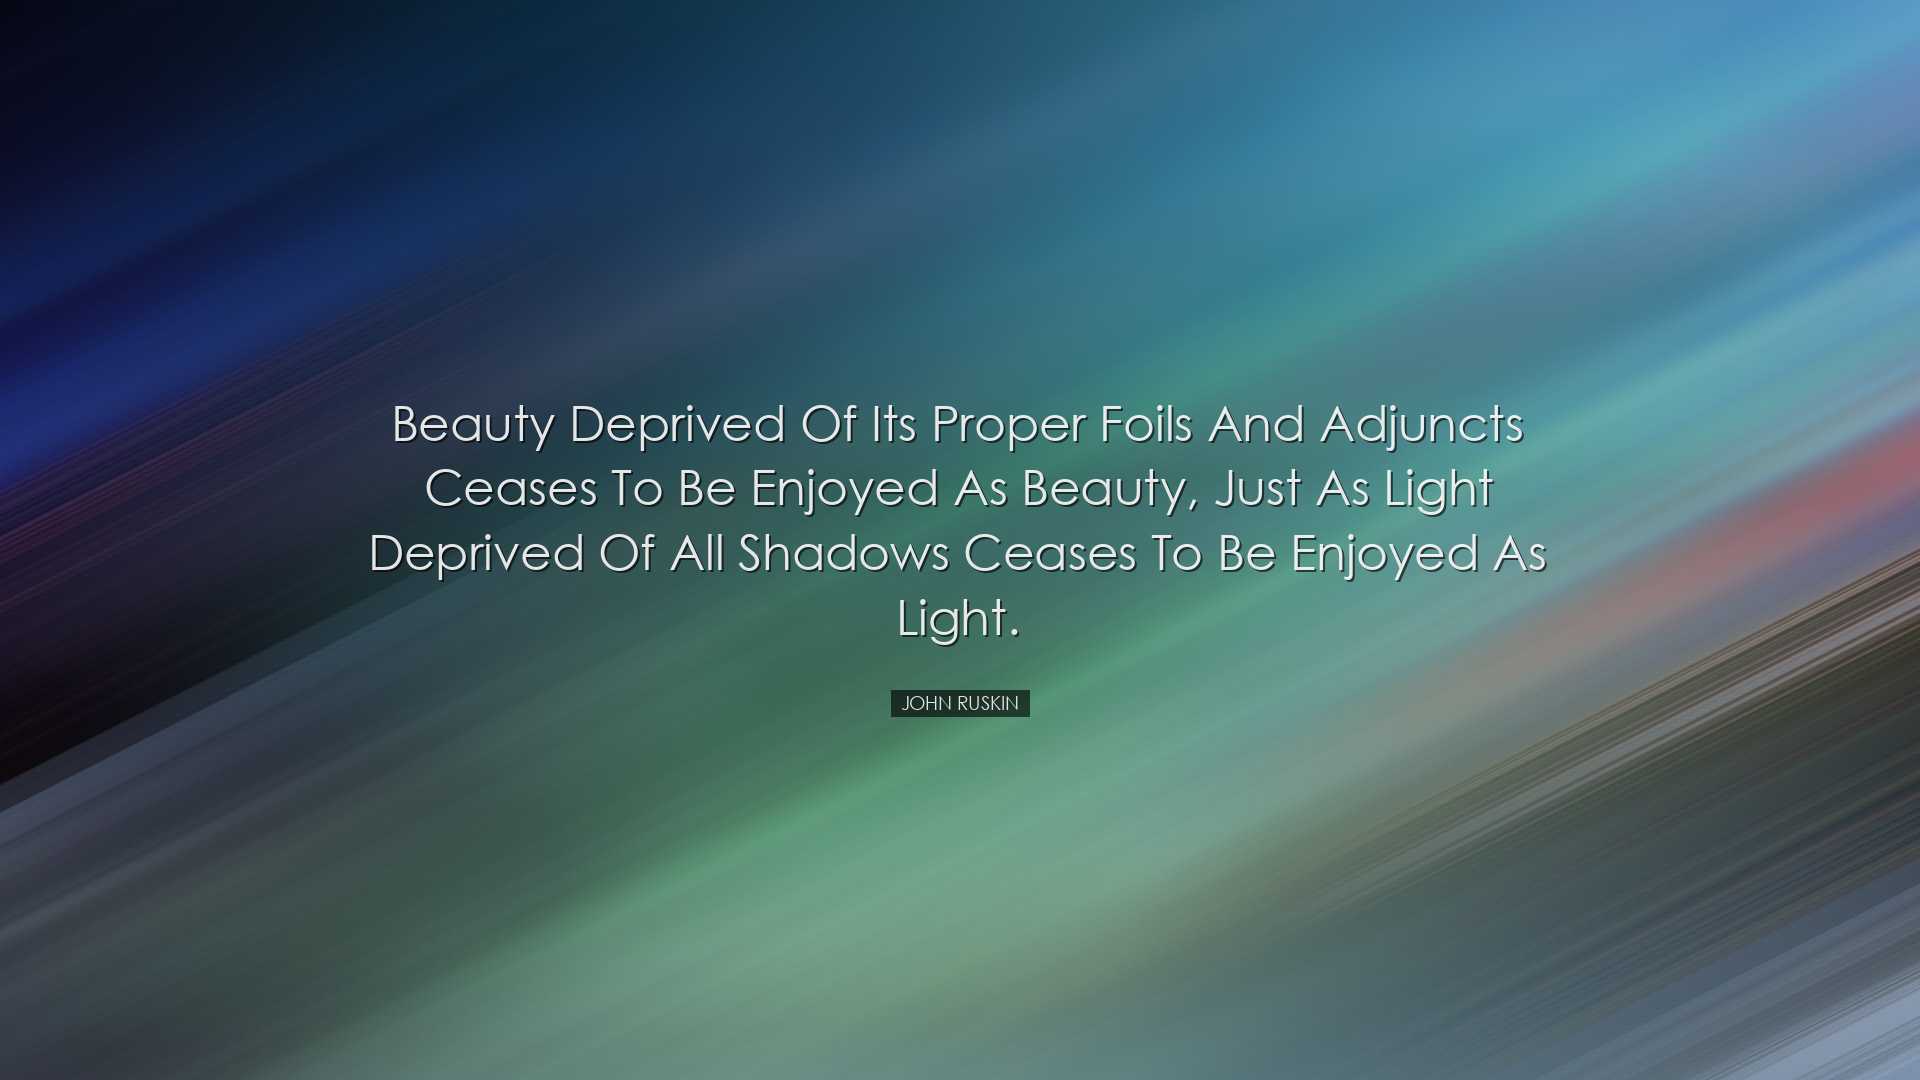 Beauty deprived of its proper foils and adjuncts ceases to be enjo